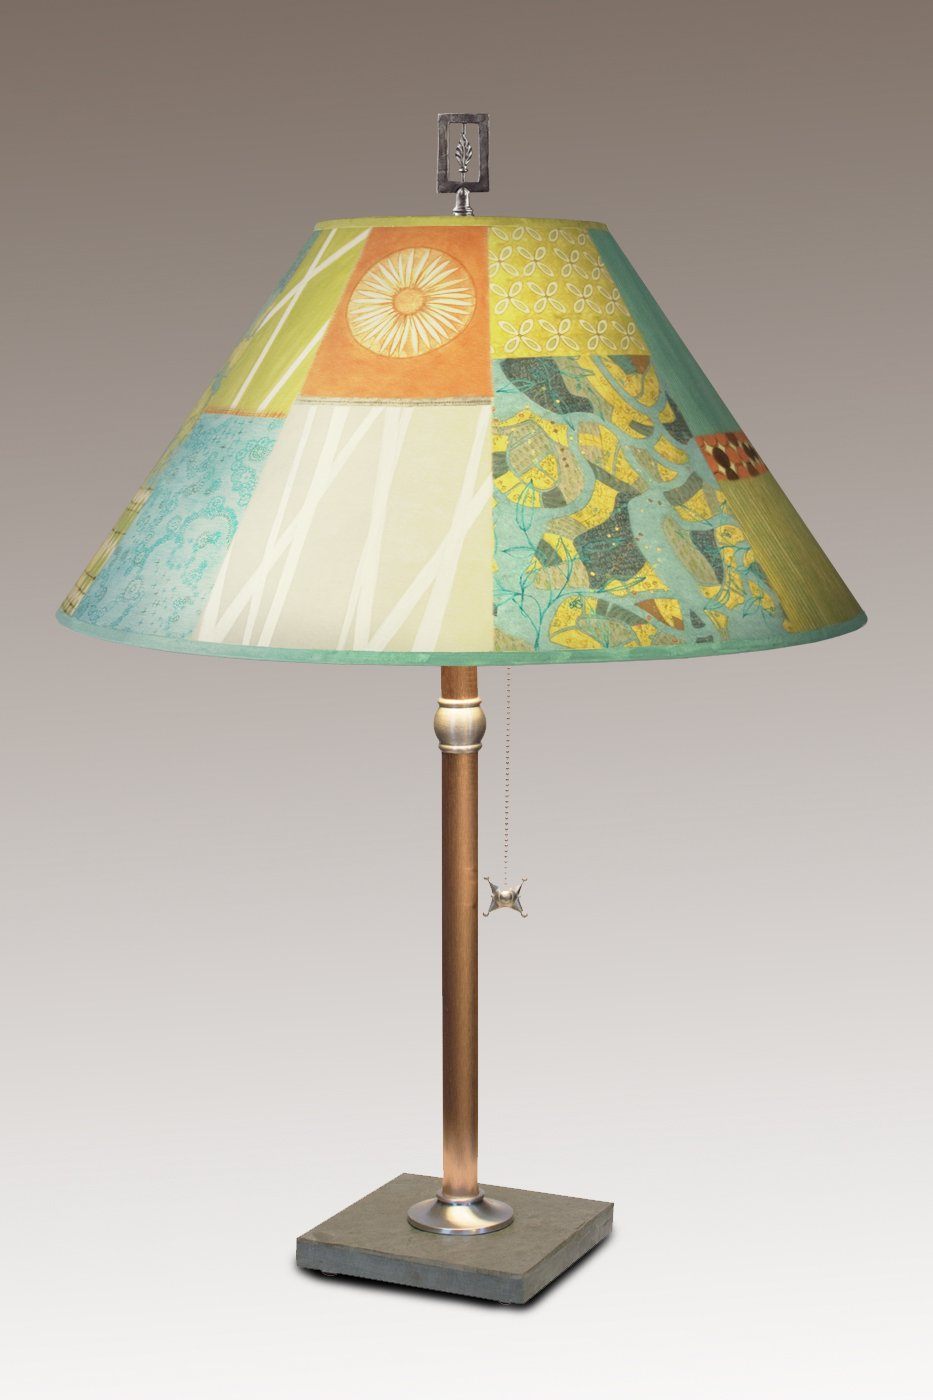 Copper Table Lamp with Large Conical Shade in Zest